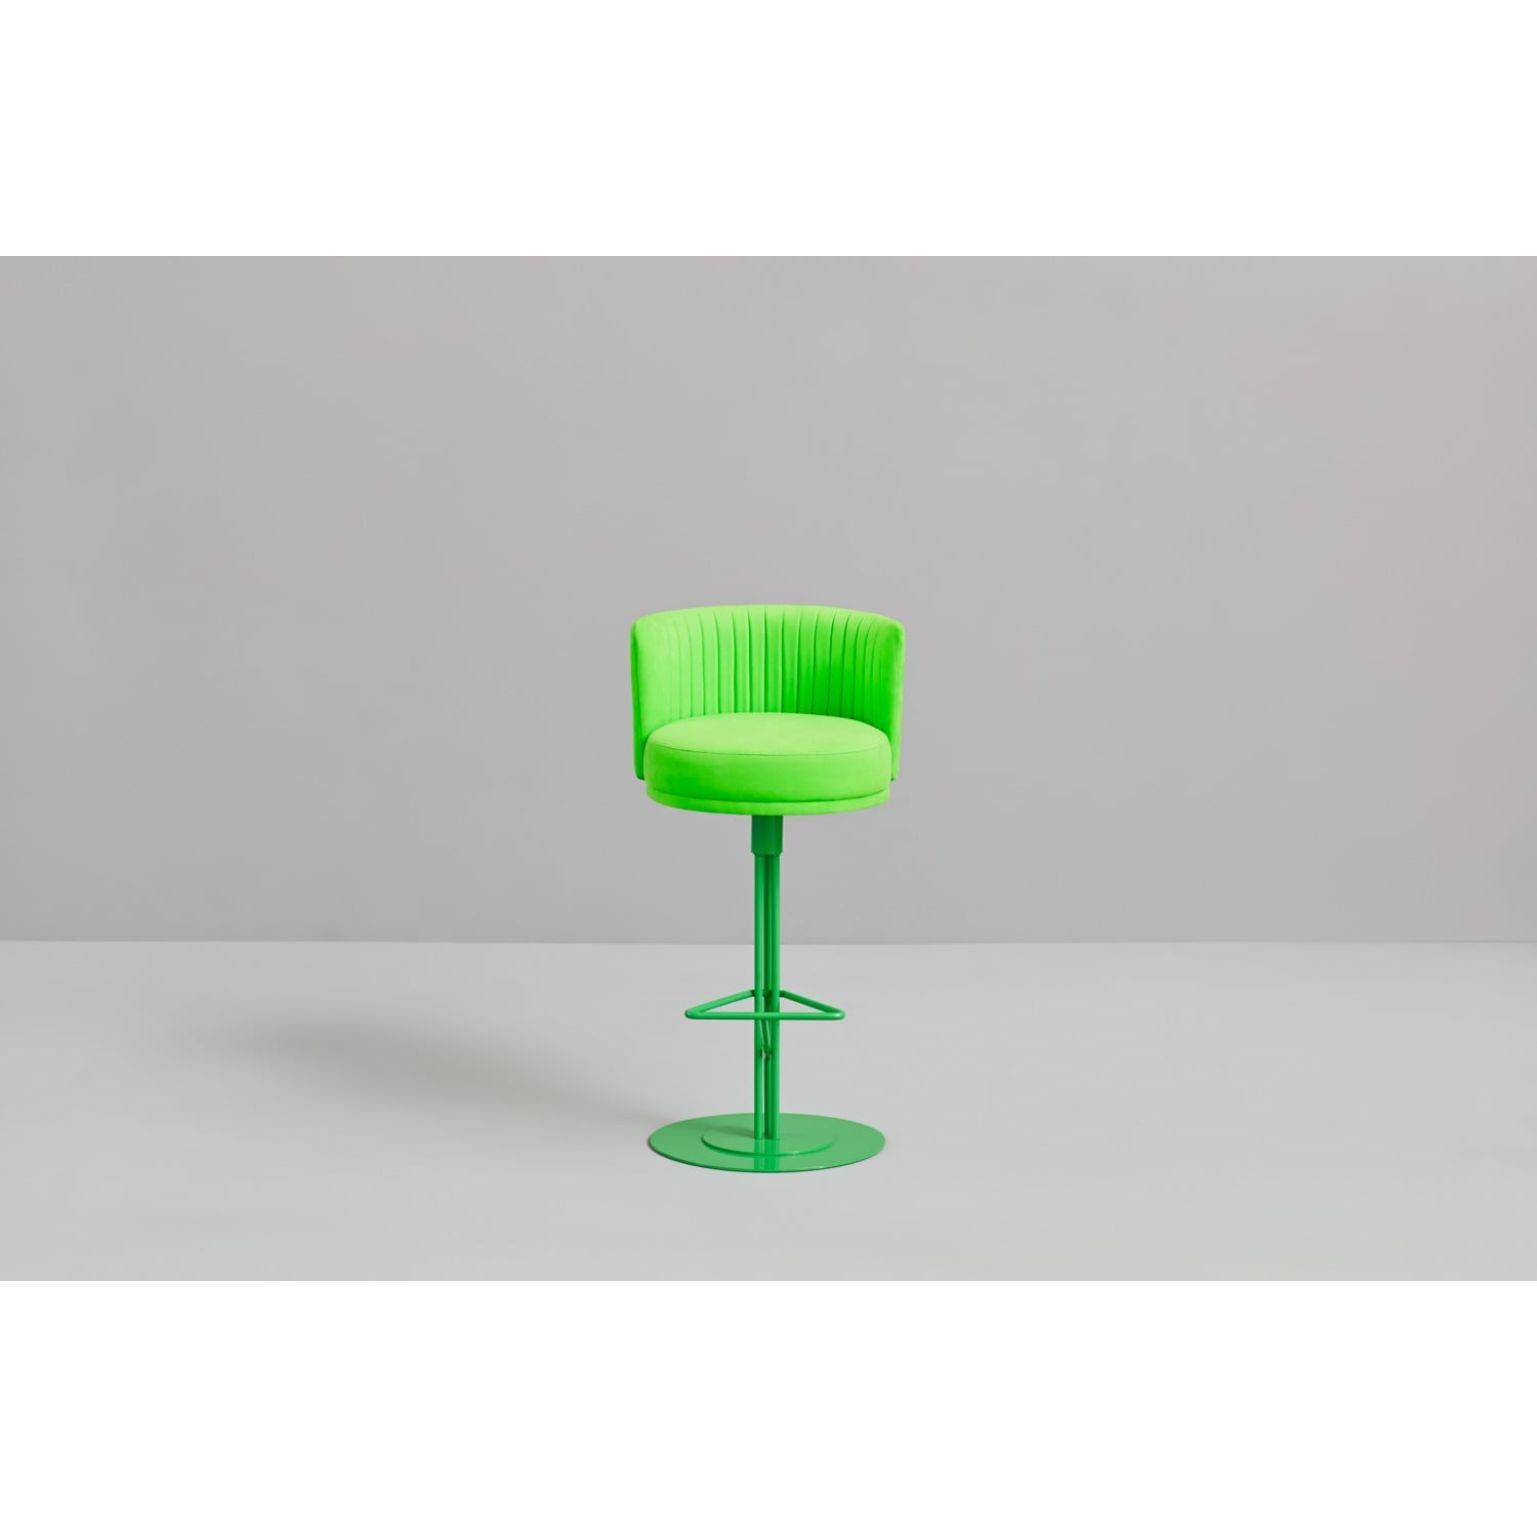 Green Athens stool by Afroditi Krassa
Dimensions: W52, D55, H101, Seat 80
Materials: Iron structure and seat particles board
Foam CMHR (high resilience and flame retardant) for all our cushion filling systems
Painted iron structure

Also